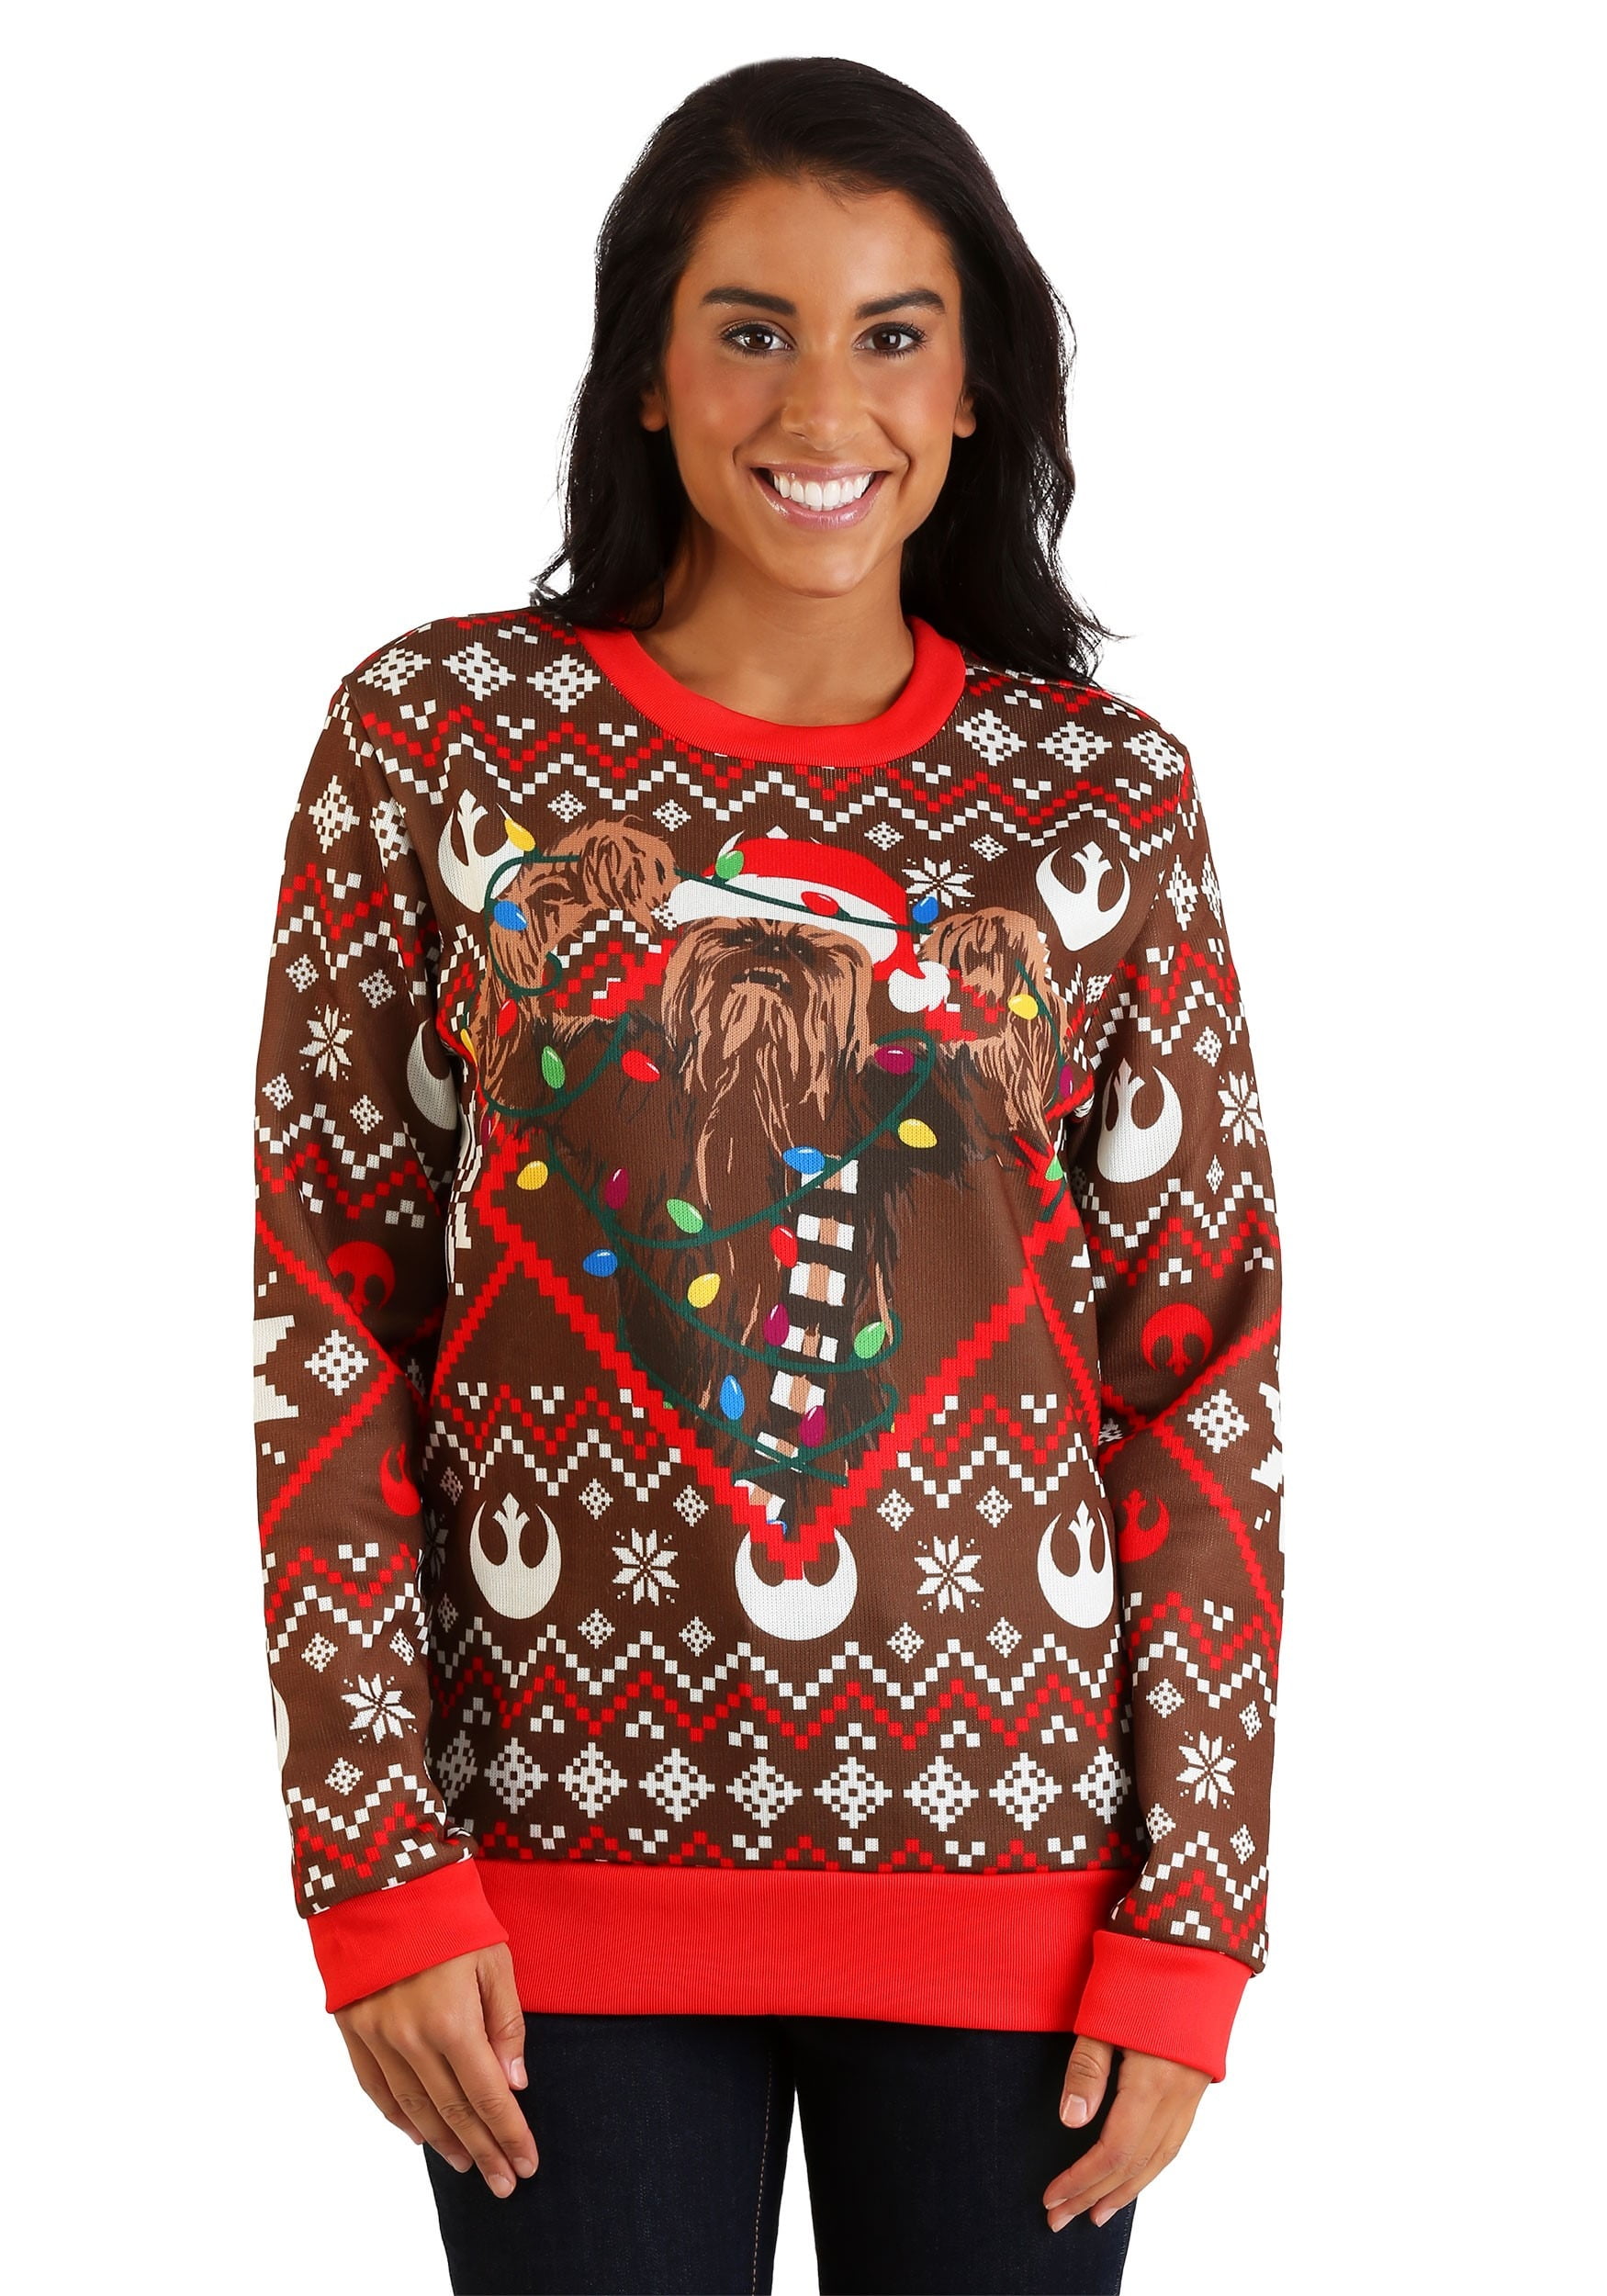 Star Wars Chewbacca Lights Brown/Red Ugly Christmas Sweater 